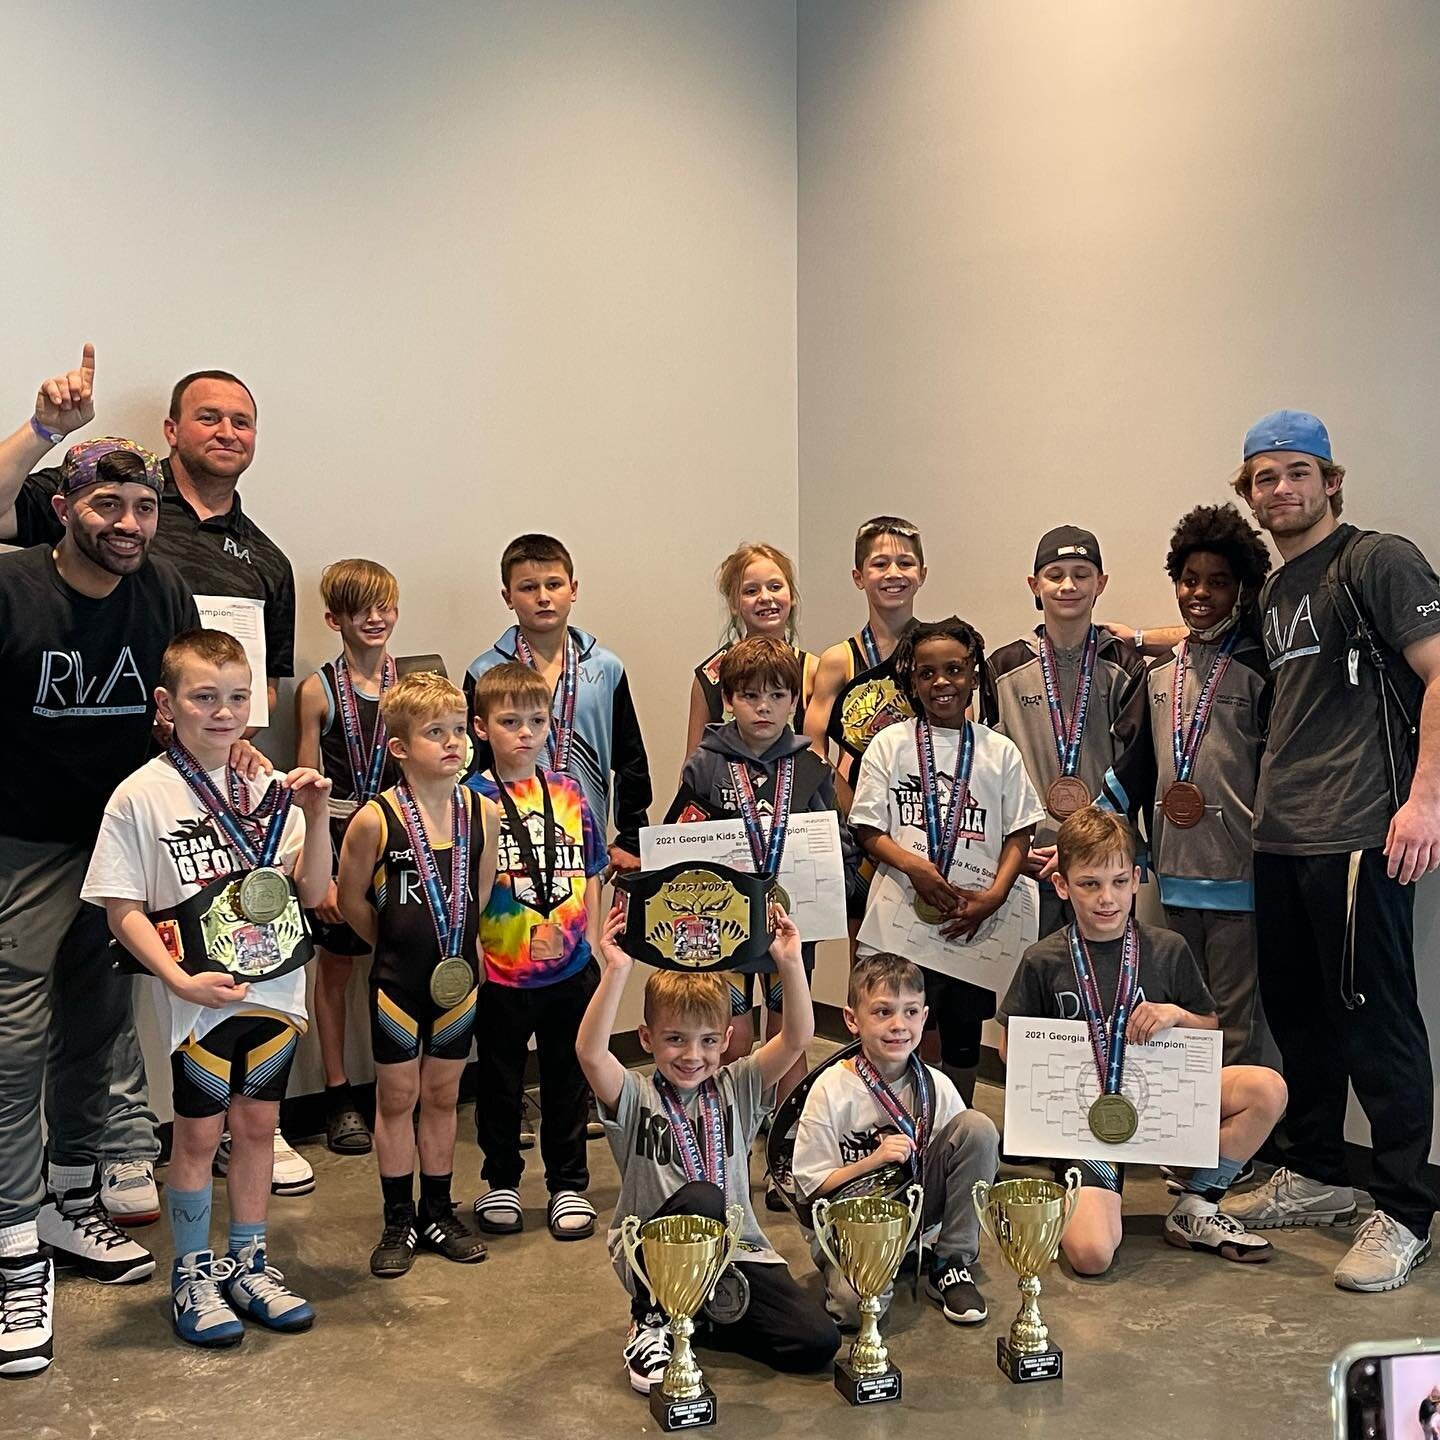 We have heard it all. &ldquo;They can&rsquo;t develop wrestlers&rdquo;, &ldquo;they are great with the older kids not younger ones&rdquo;, etc. 
Bring out the brooms 🧹 swept the day! 6u, 8u, and 10u TEAM STATE CHAMPS! 🔥💯💪🏼🥇

Individual Champs
6